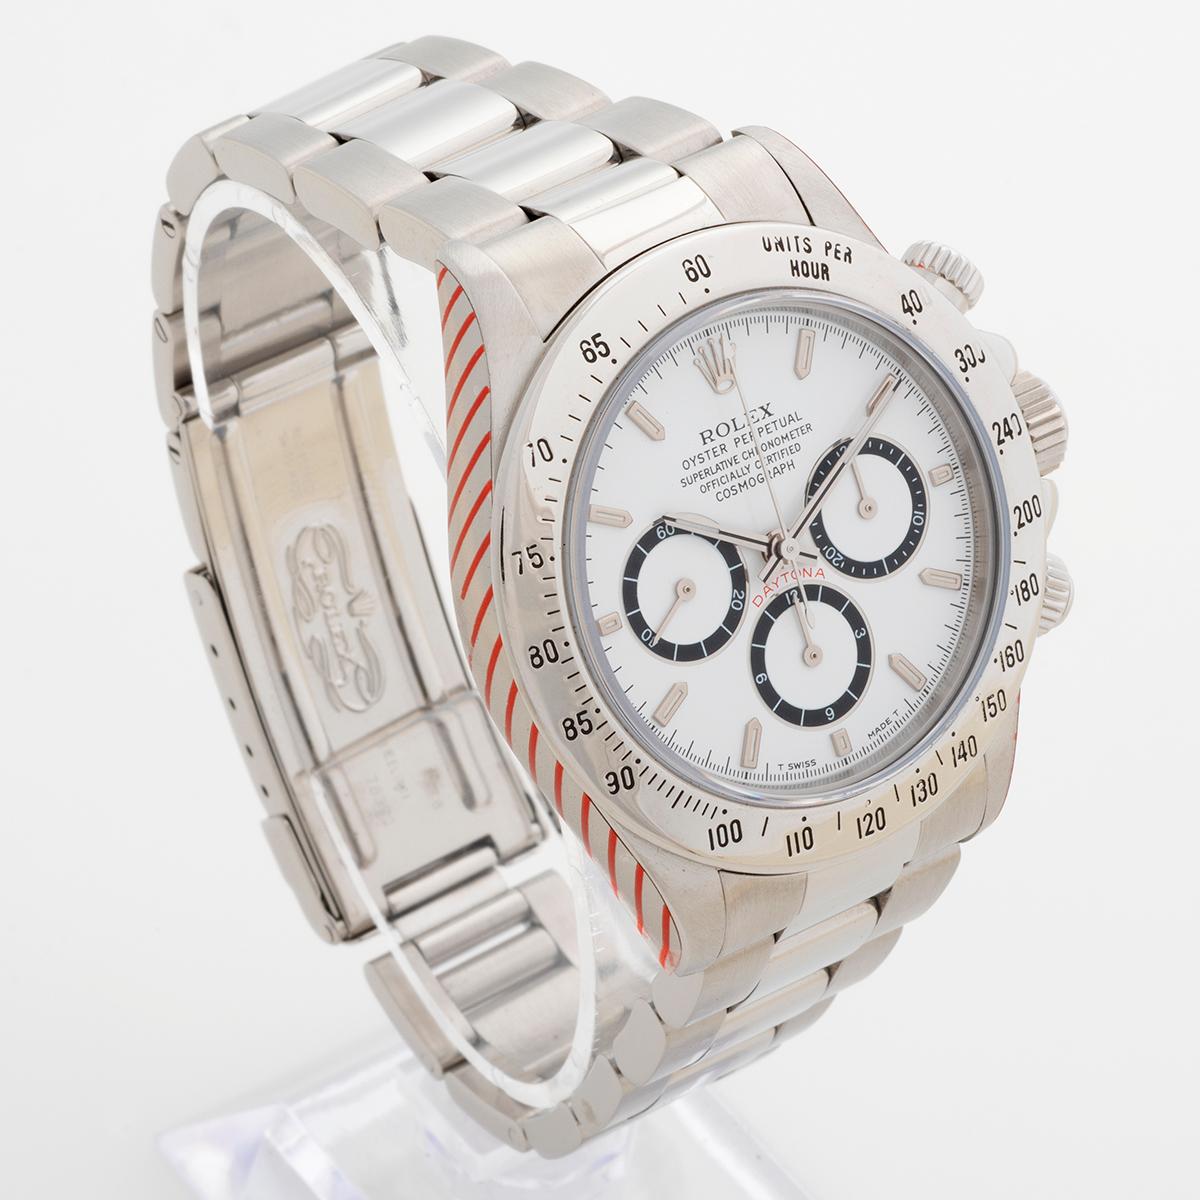 Rolex Daytona Ref 16520, Zenith Movement and White Dial with 'Inverted Six' 1